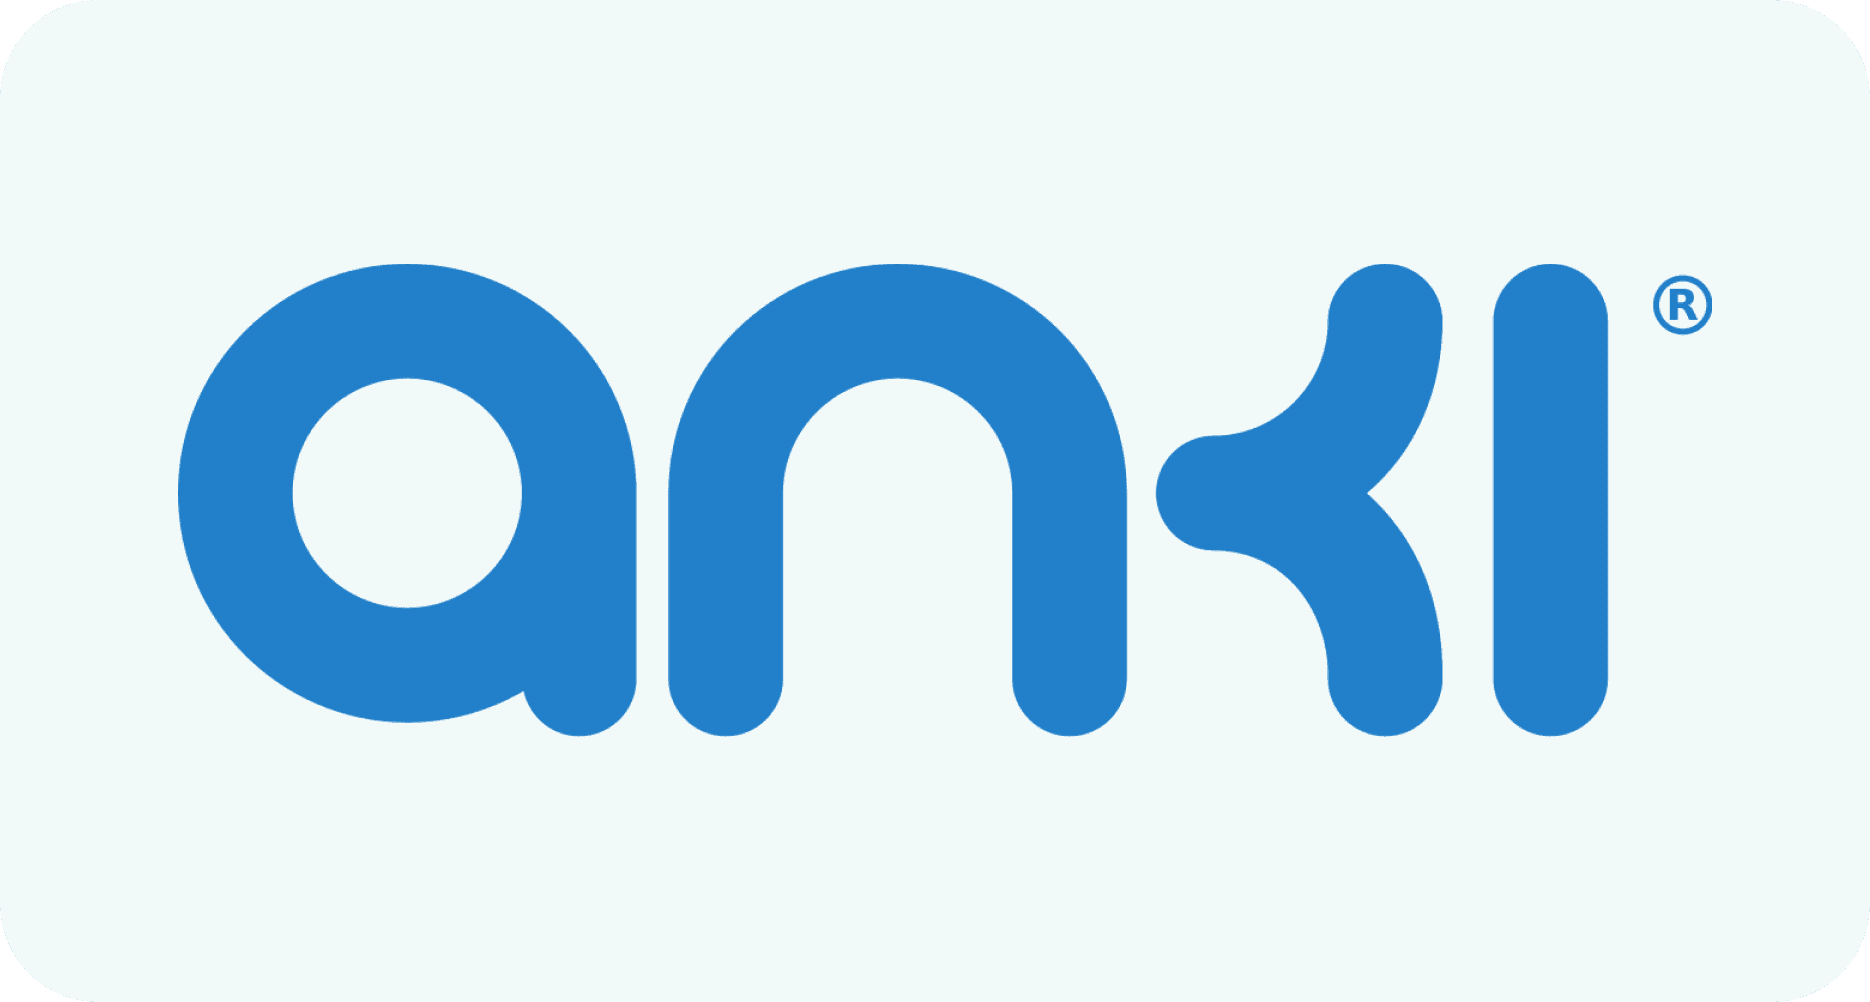 Anki Logo as an App that features Spaced Repetition